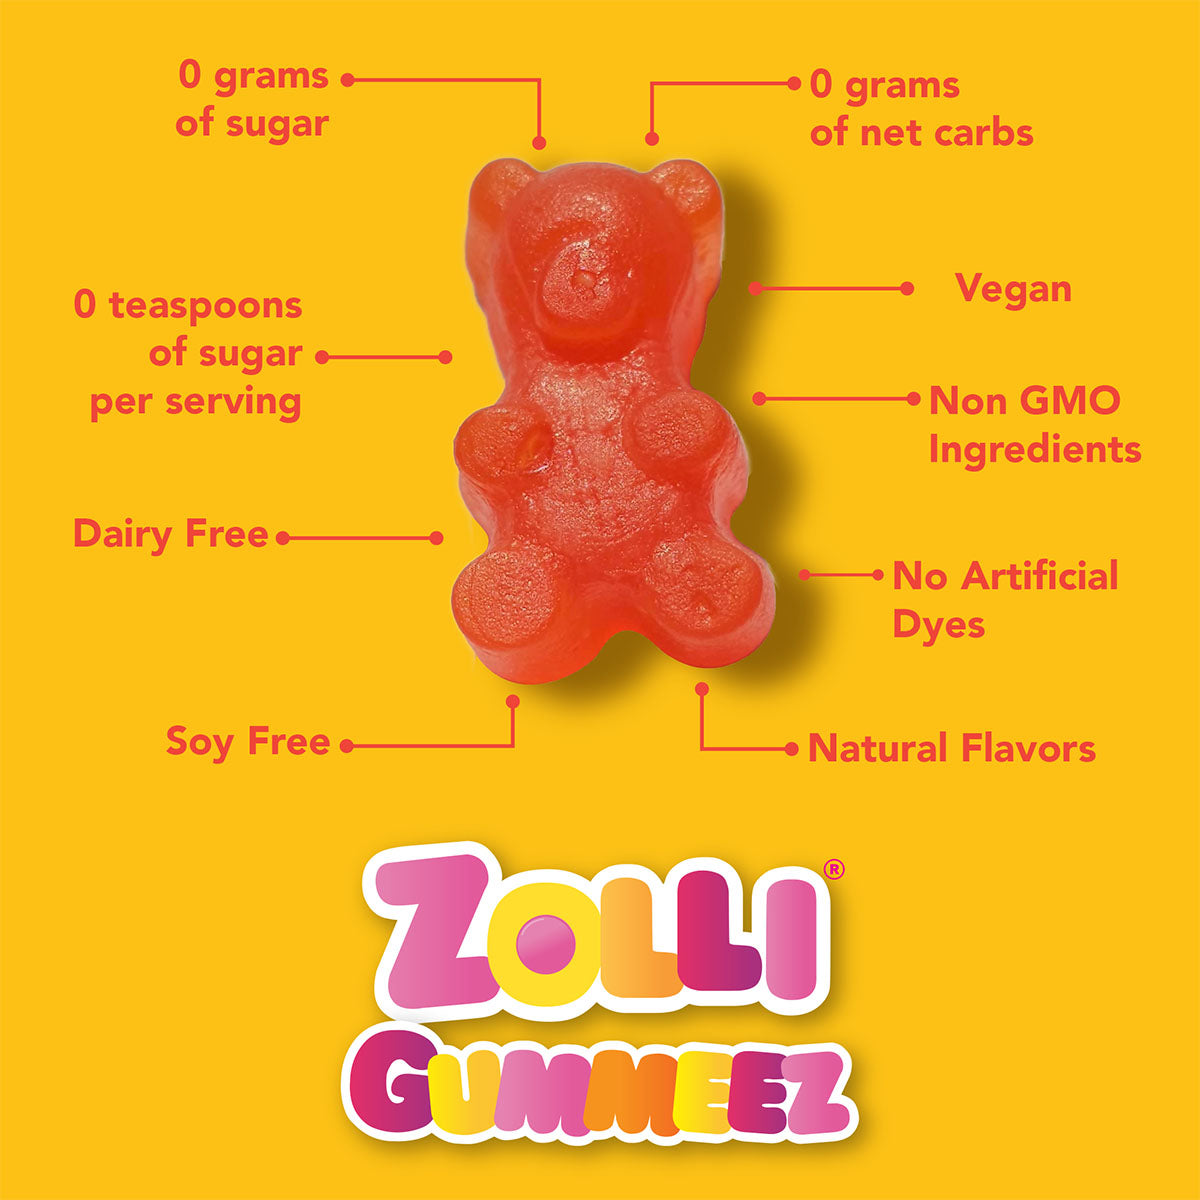 Zolli Candy Gummeez Attributes. 0 grams of sugar. Dairy Free. Gelatin free. Soy Free. Vegan. No Artificial Dyes. Natural Flavors and Colors.